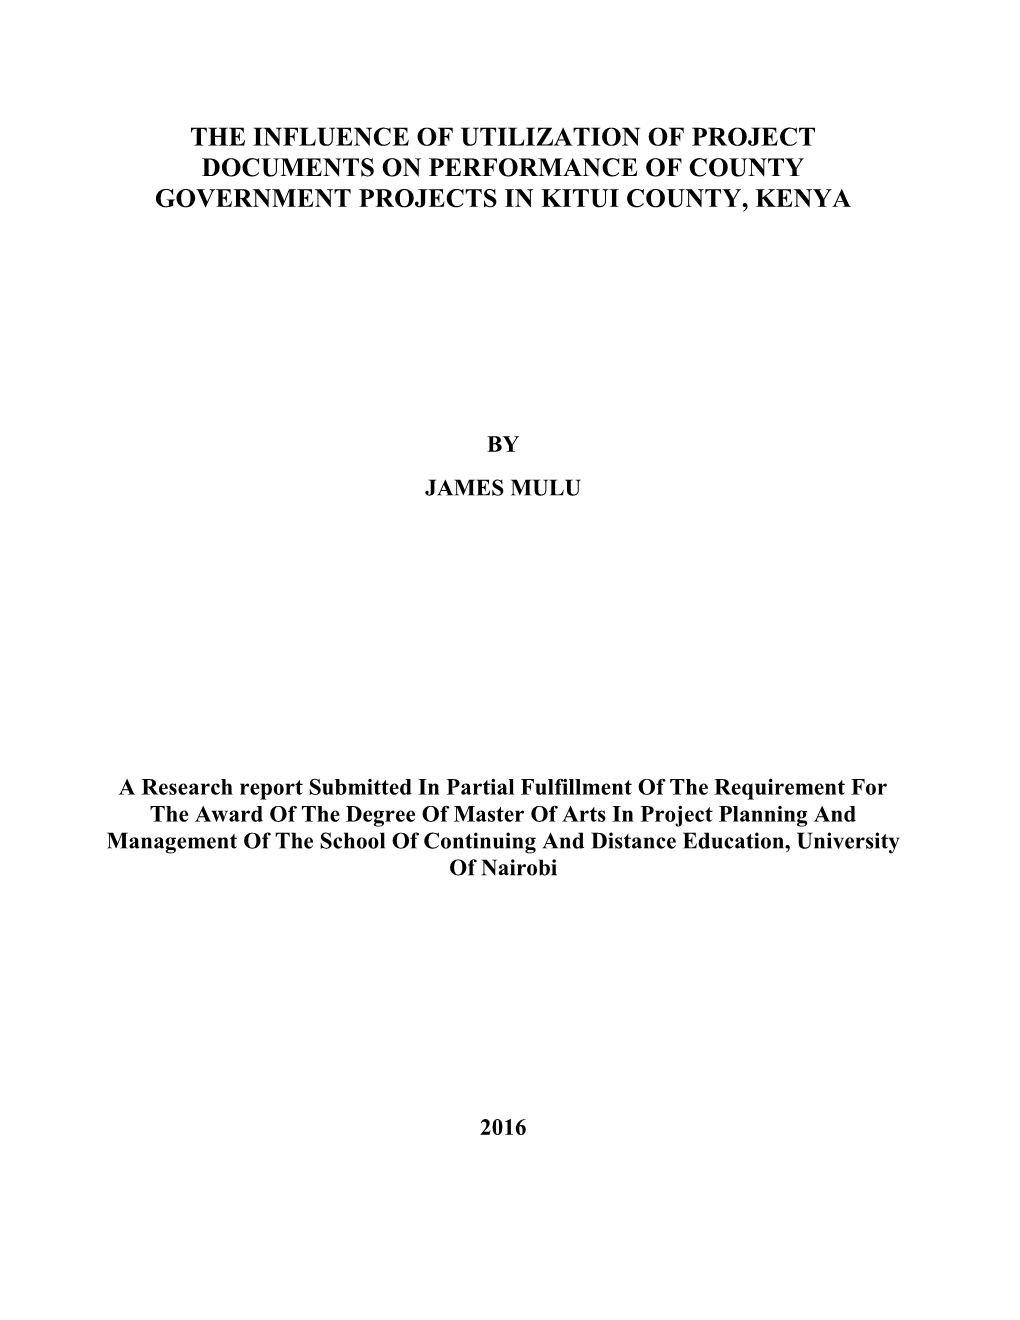 The Influence of Utilization of Project Documents on Performance of County Government Projects in Kitui County, Kenya